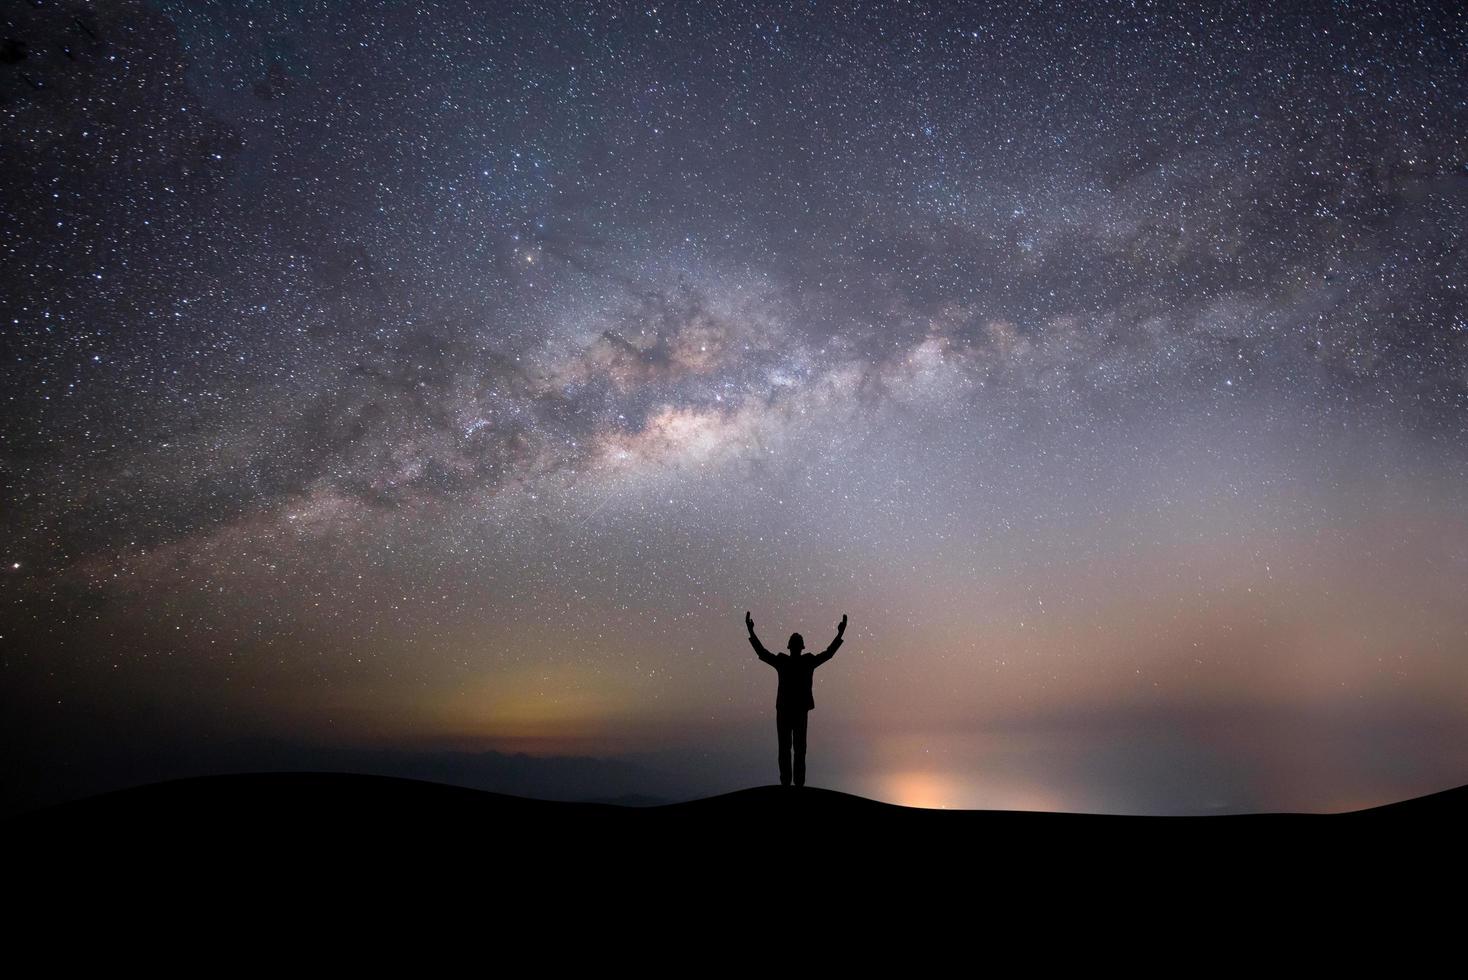 Silhouette of a person on top of a hill with stars photo